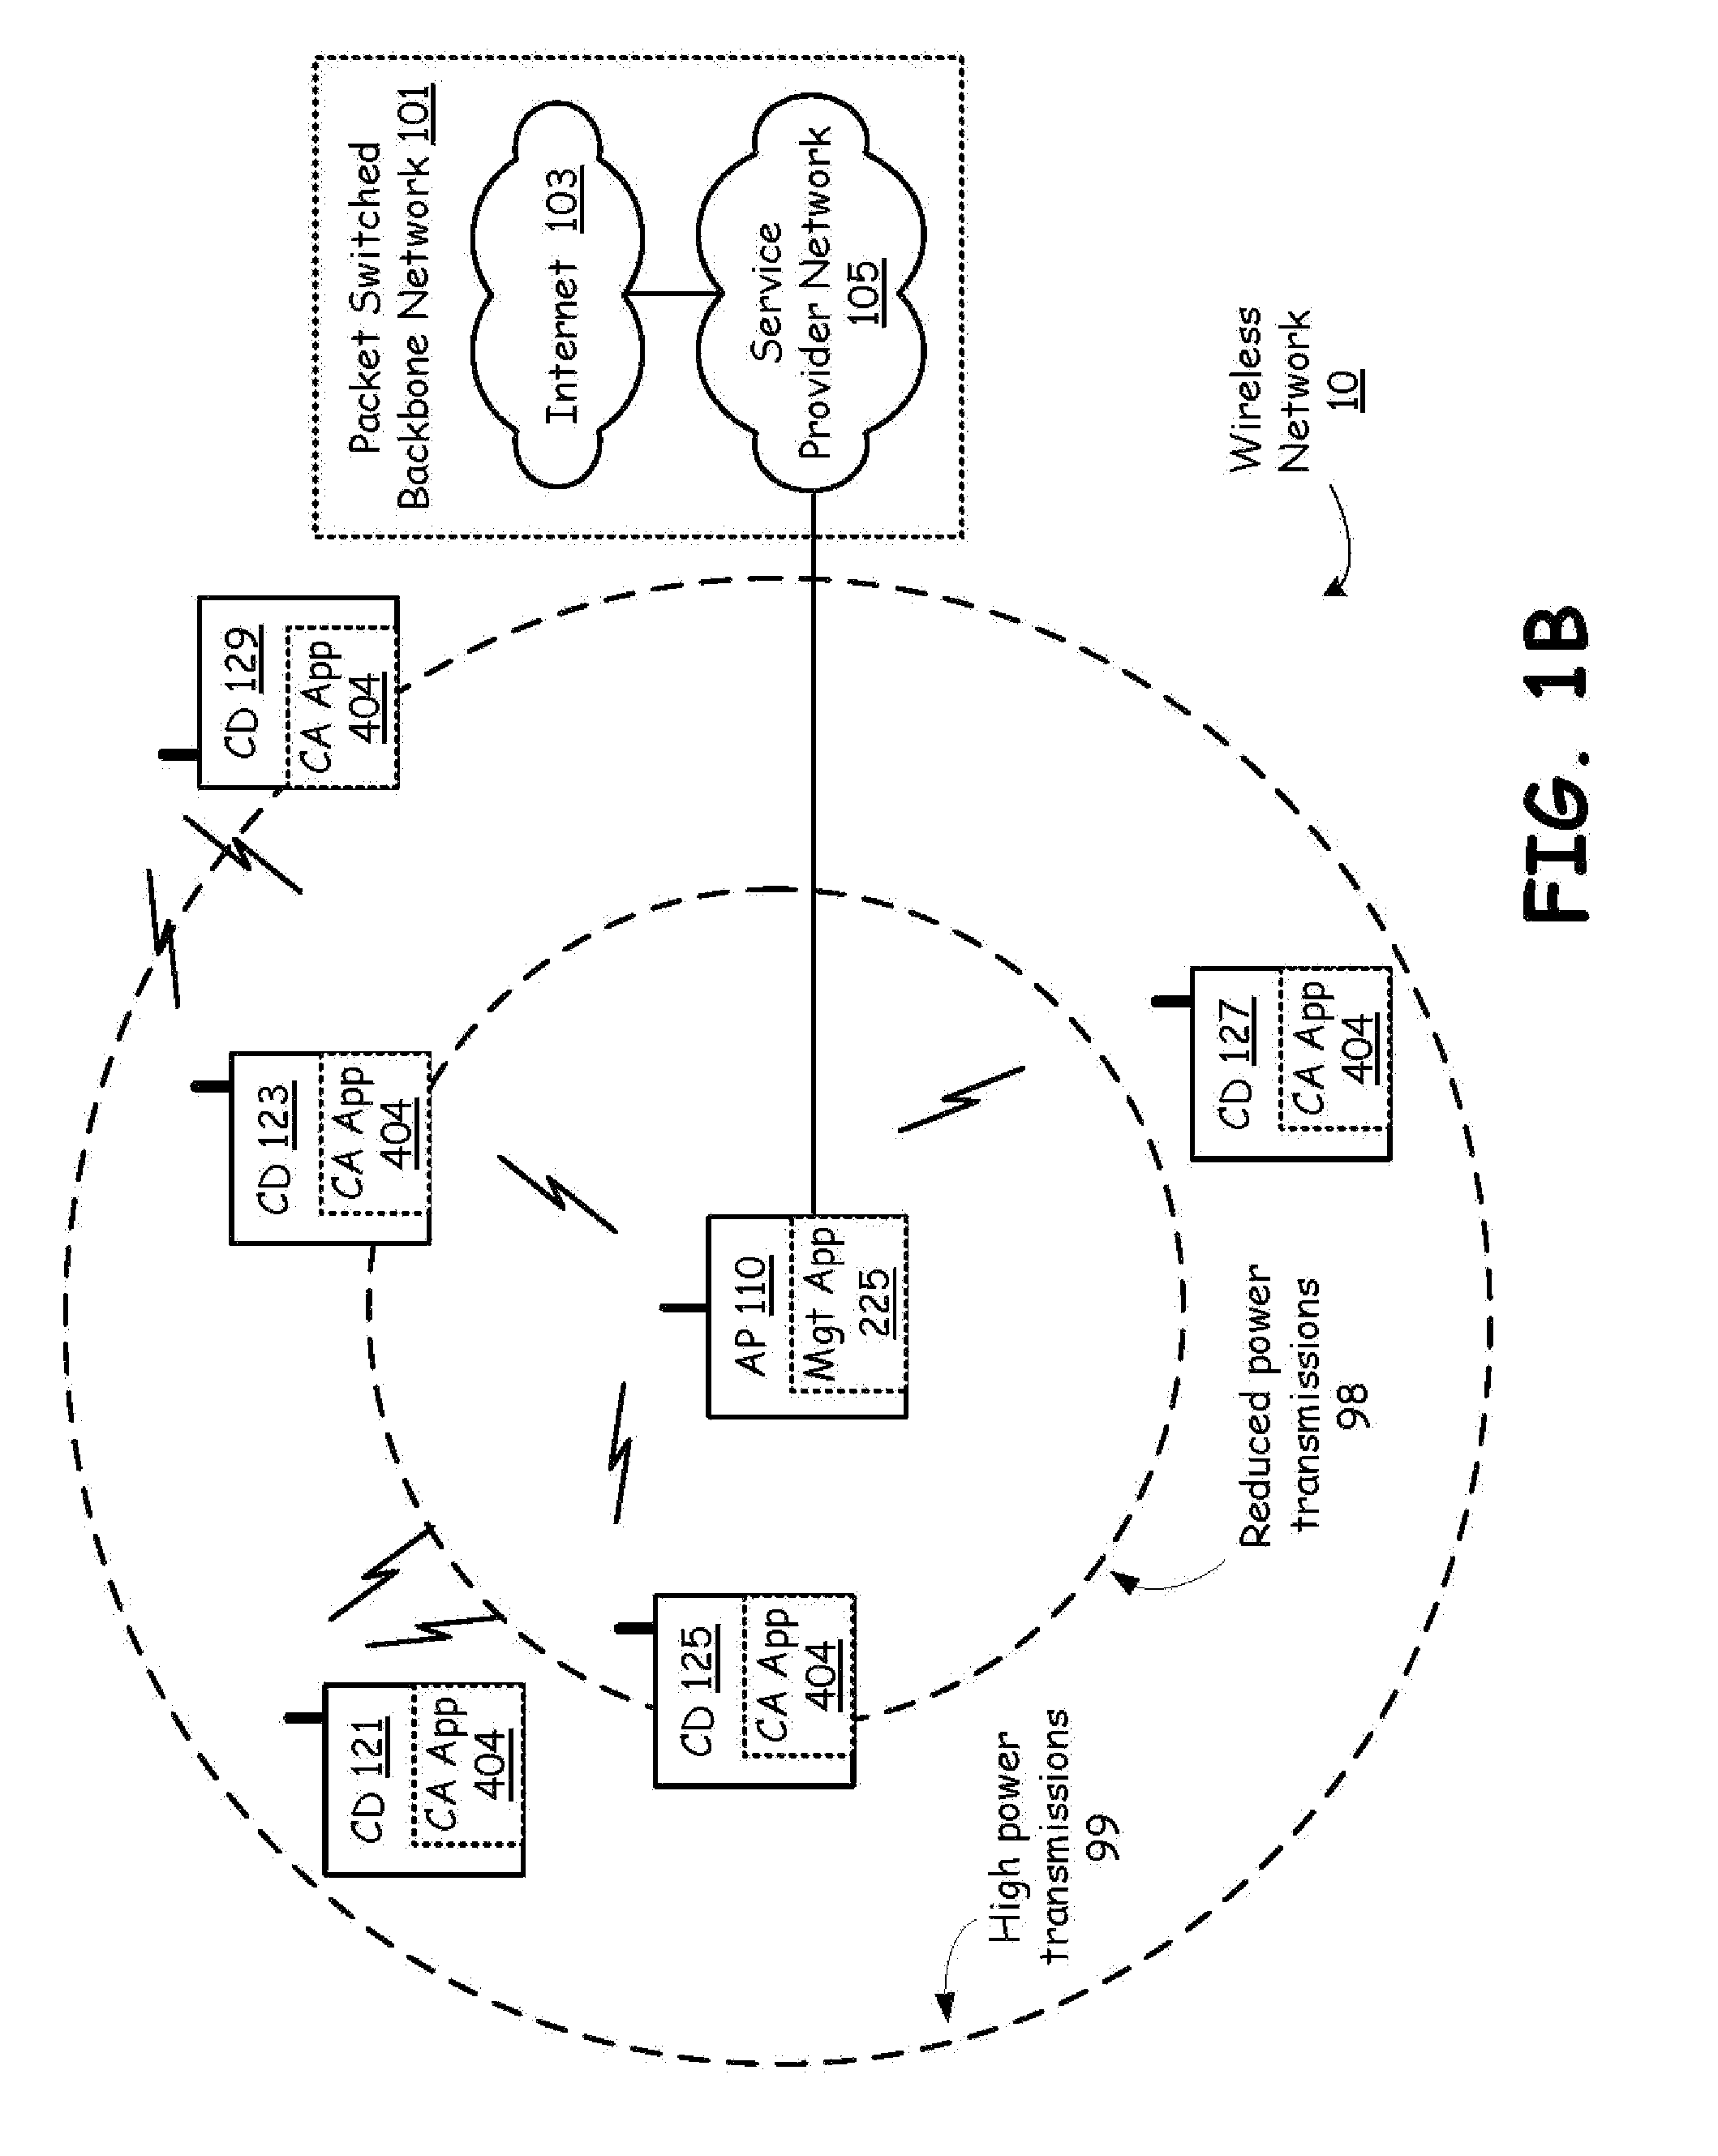 Client device characterization of other client device transmissions and reporting of signal qualities to access point(s)